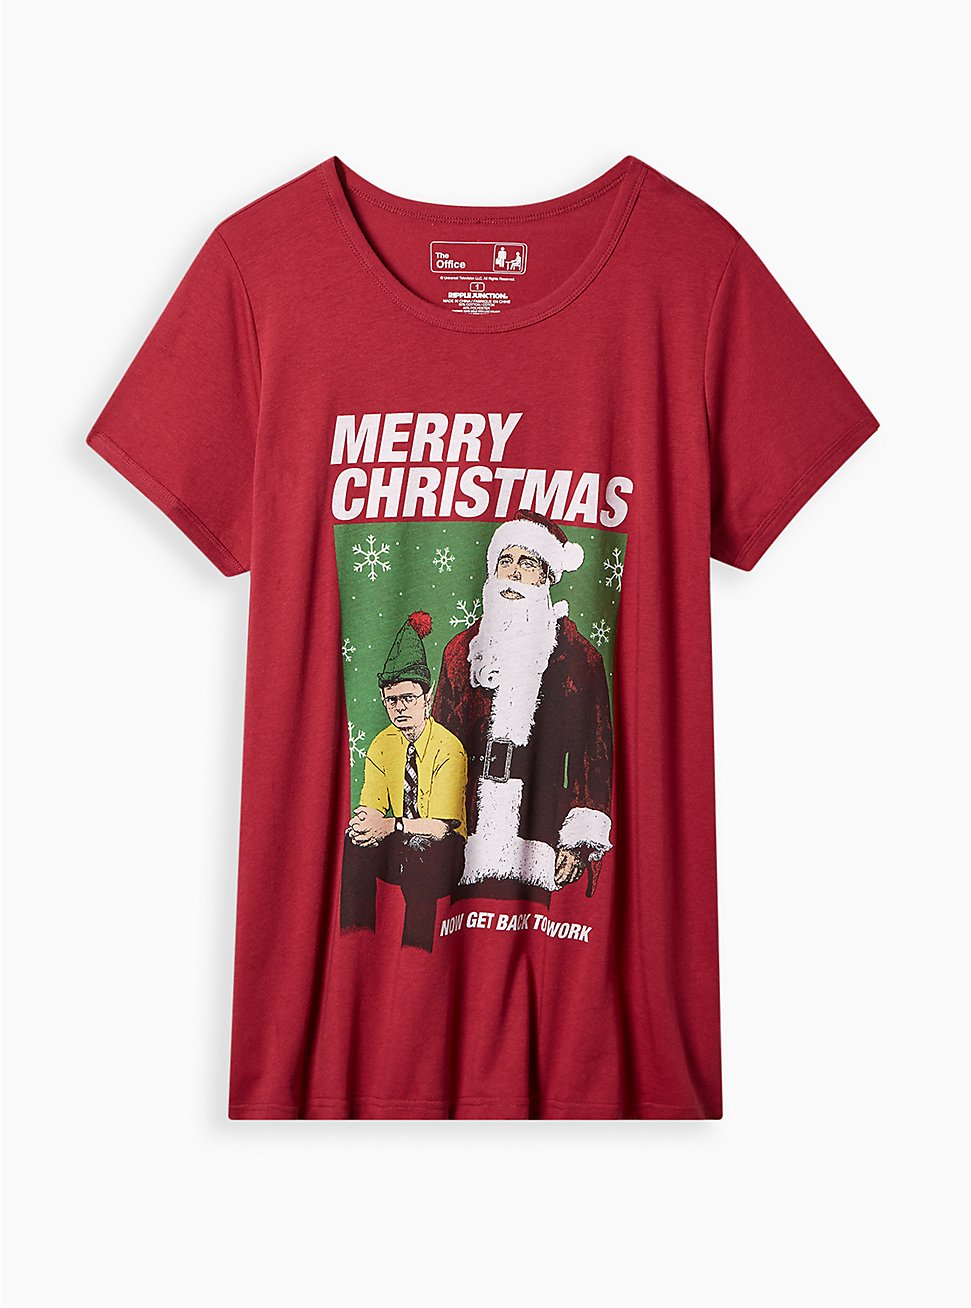 The Office Merry Christmas Classic Fit Cotton Ringer Tee, JESTER RED, hi-res